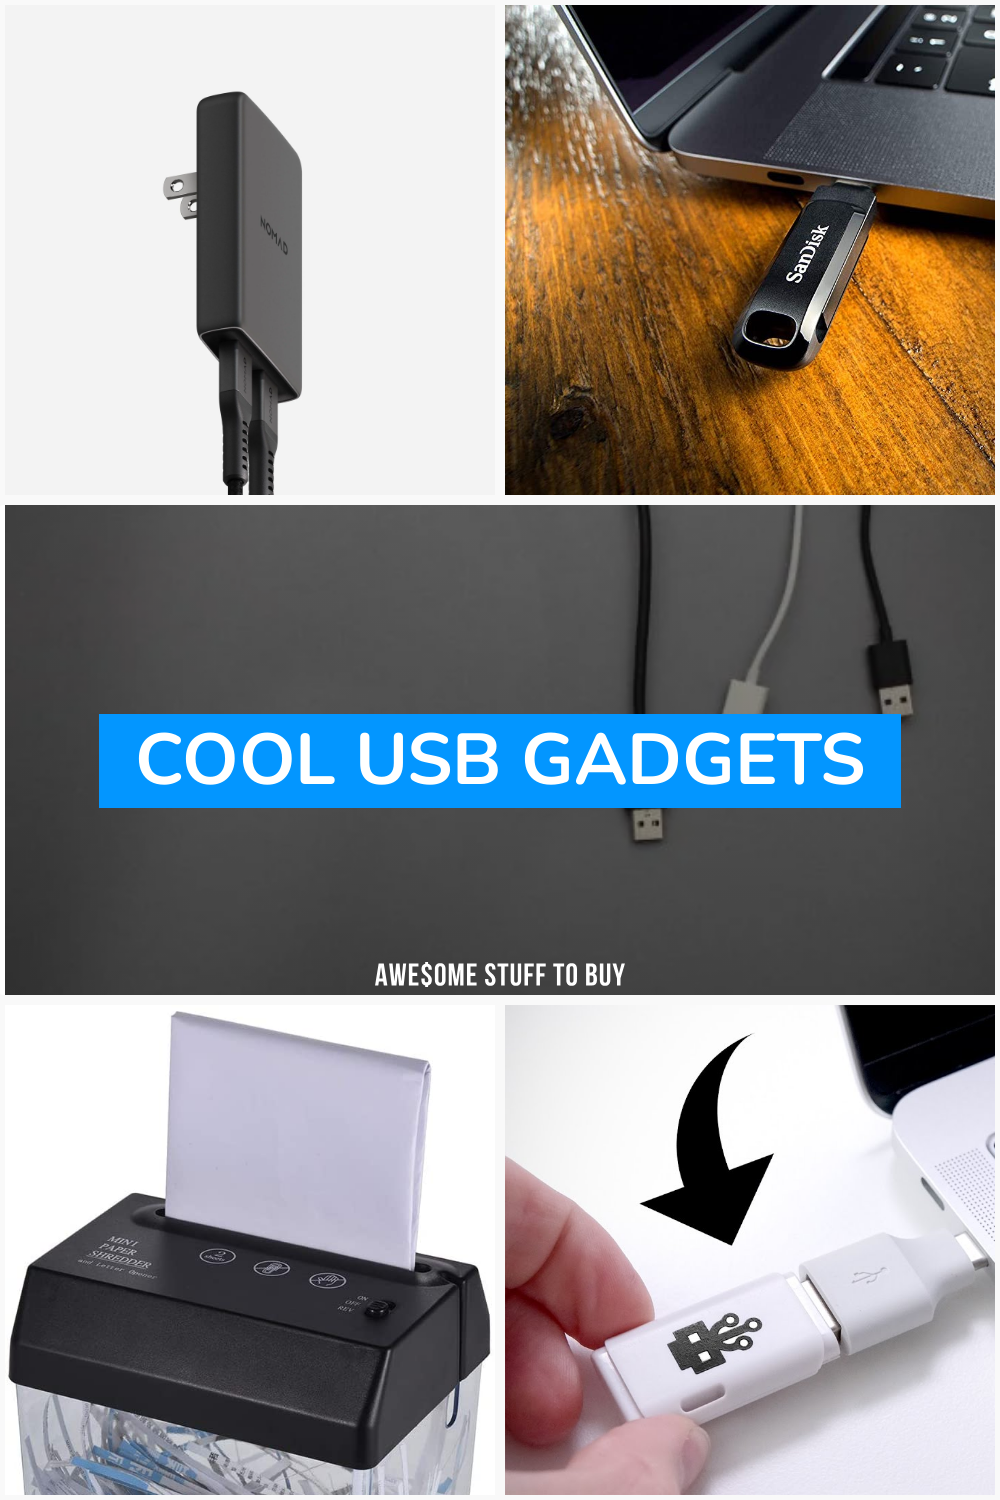 Cool USB Gadgets // Awesome Stuff to Buy